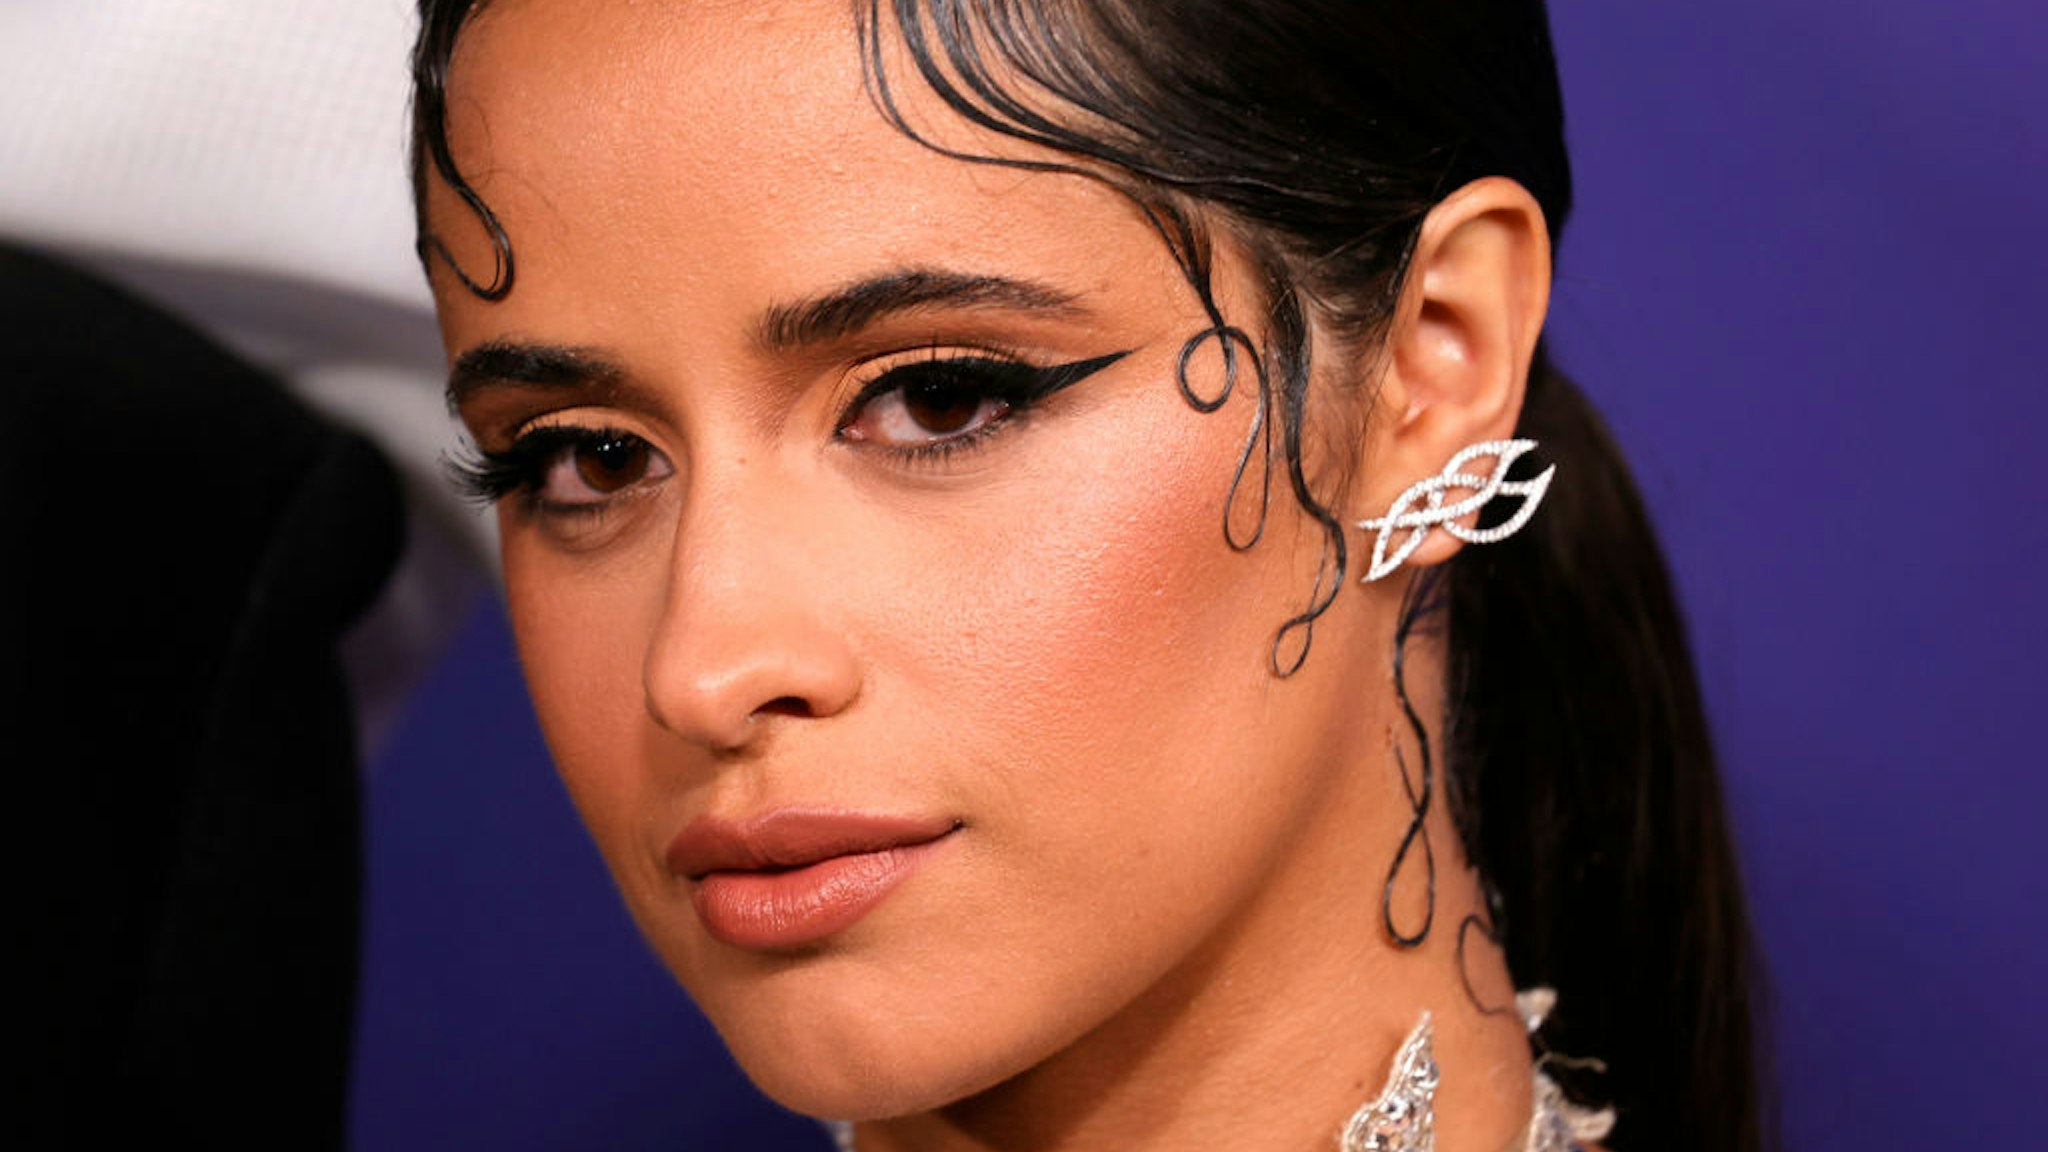 Camila Cabello attends the Los Angeles Premiere of Amazon Studios' "Cinderella"at The Greek Theatre on August 30, 2021 in Los Angeles, California.